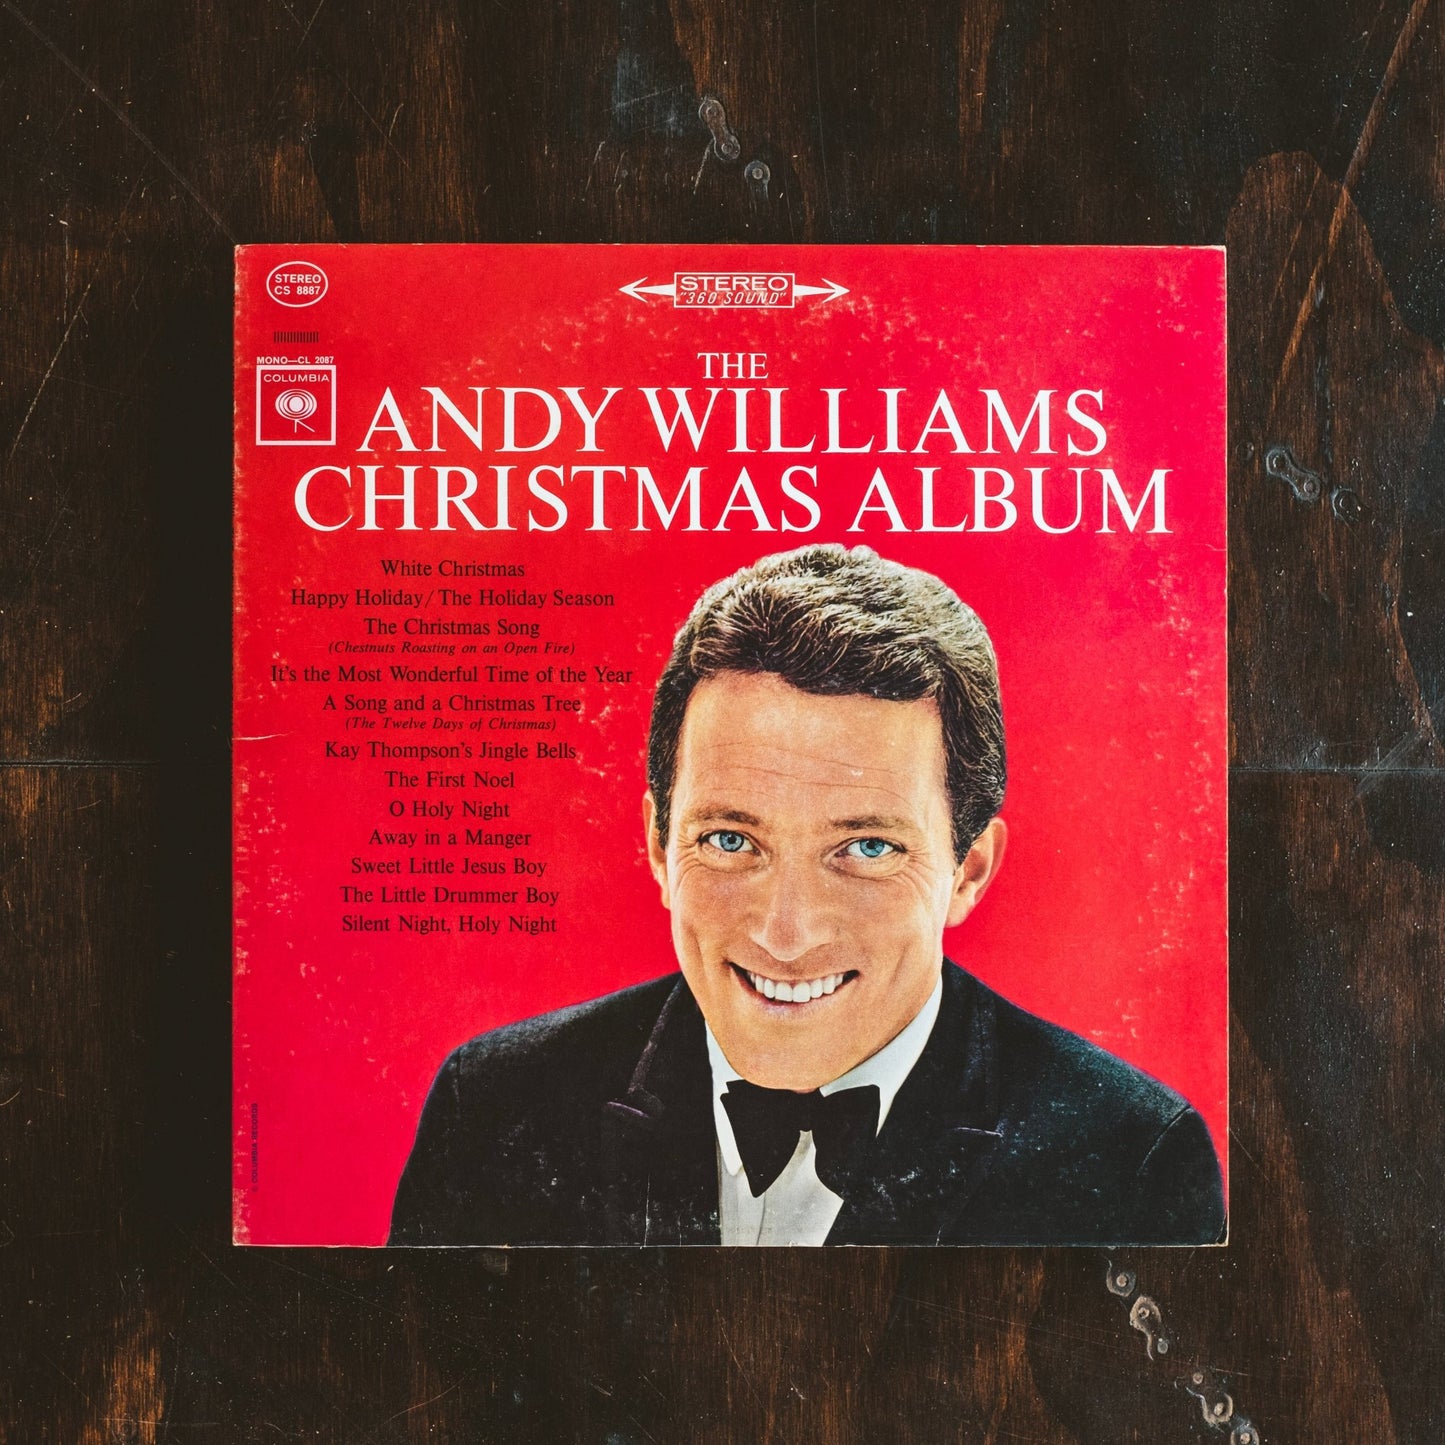 Williams, Andy - The Andy Williams Christmas Album (Pre-Loved) - G-Williams, Andy - Andy Williams Christmas Album - LP's - Yellow Racket Records